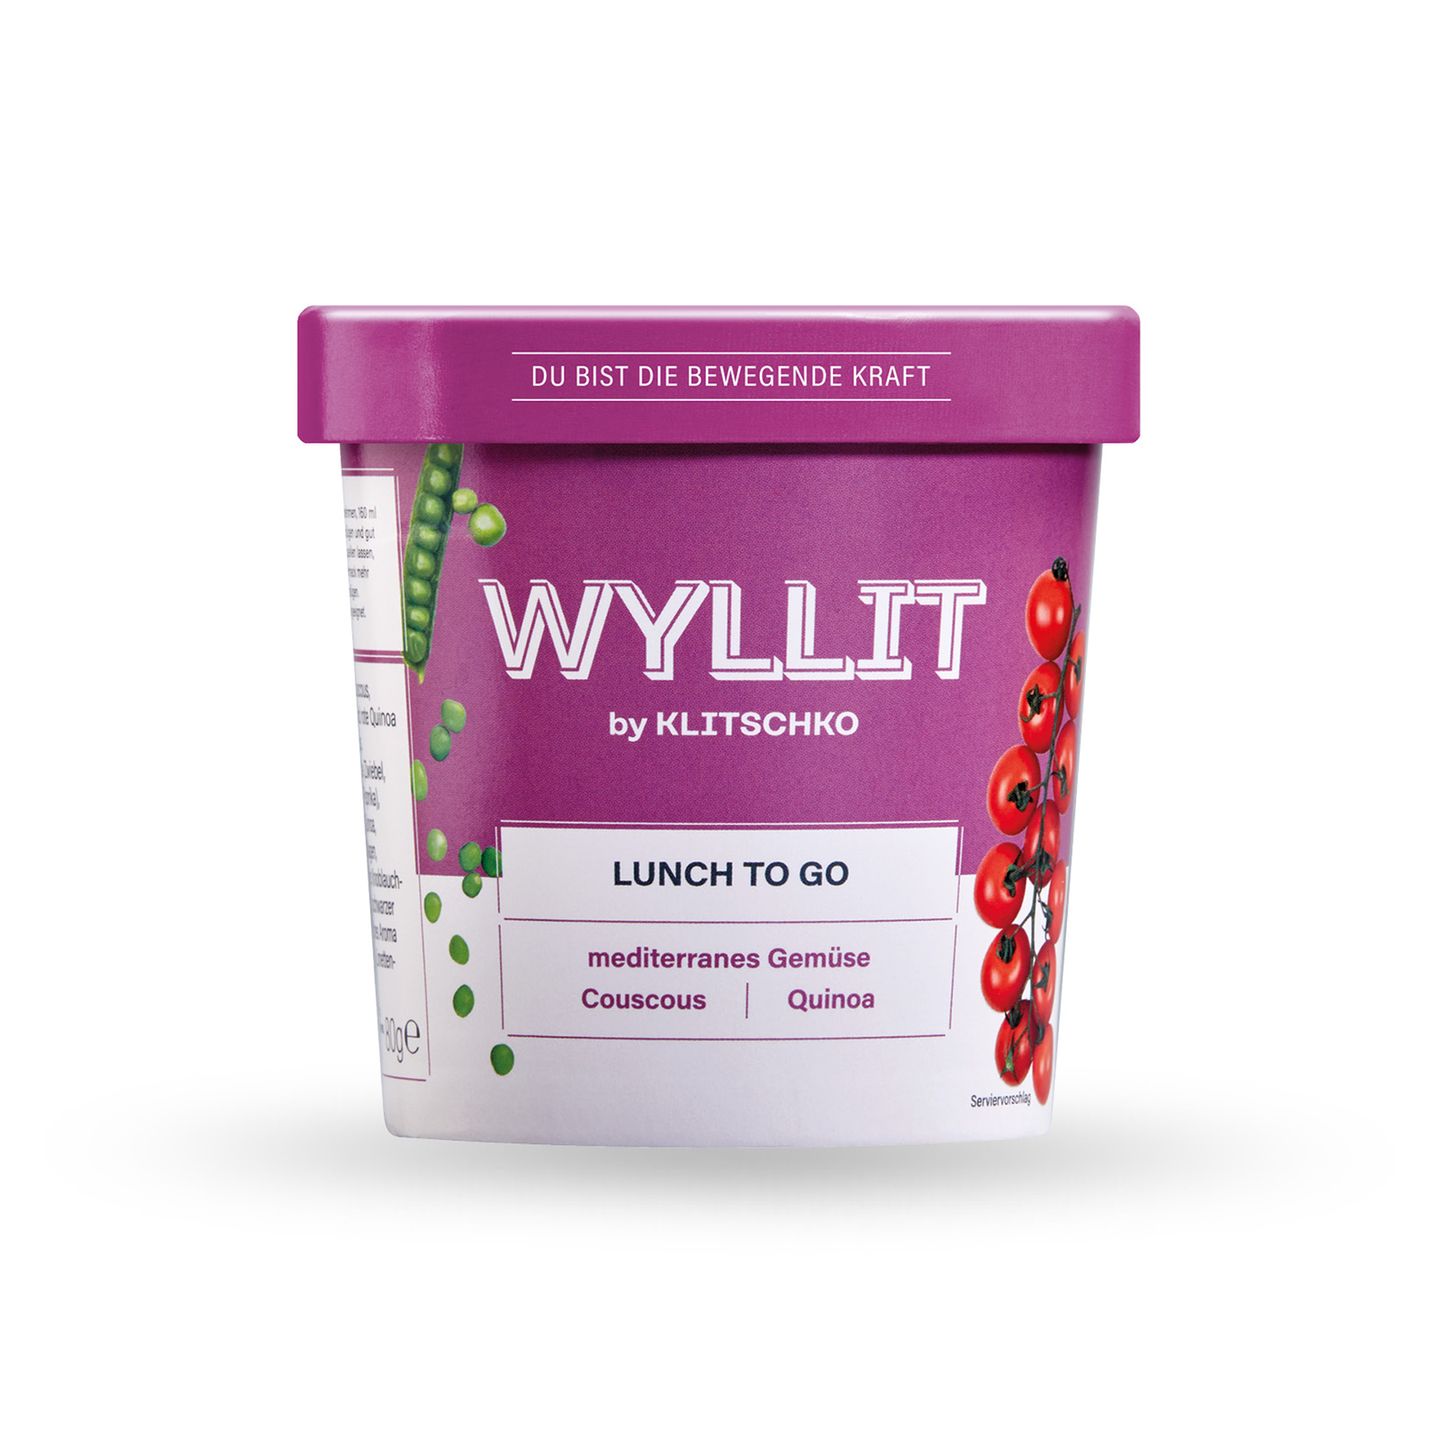 WYLLIT Lunch to go